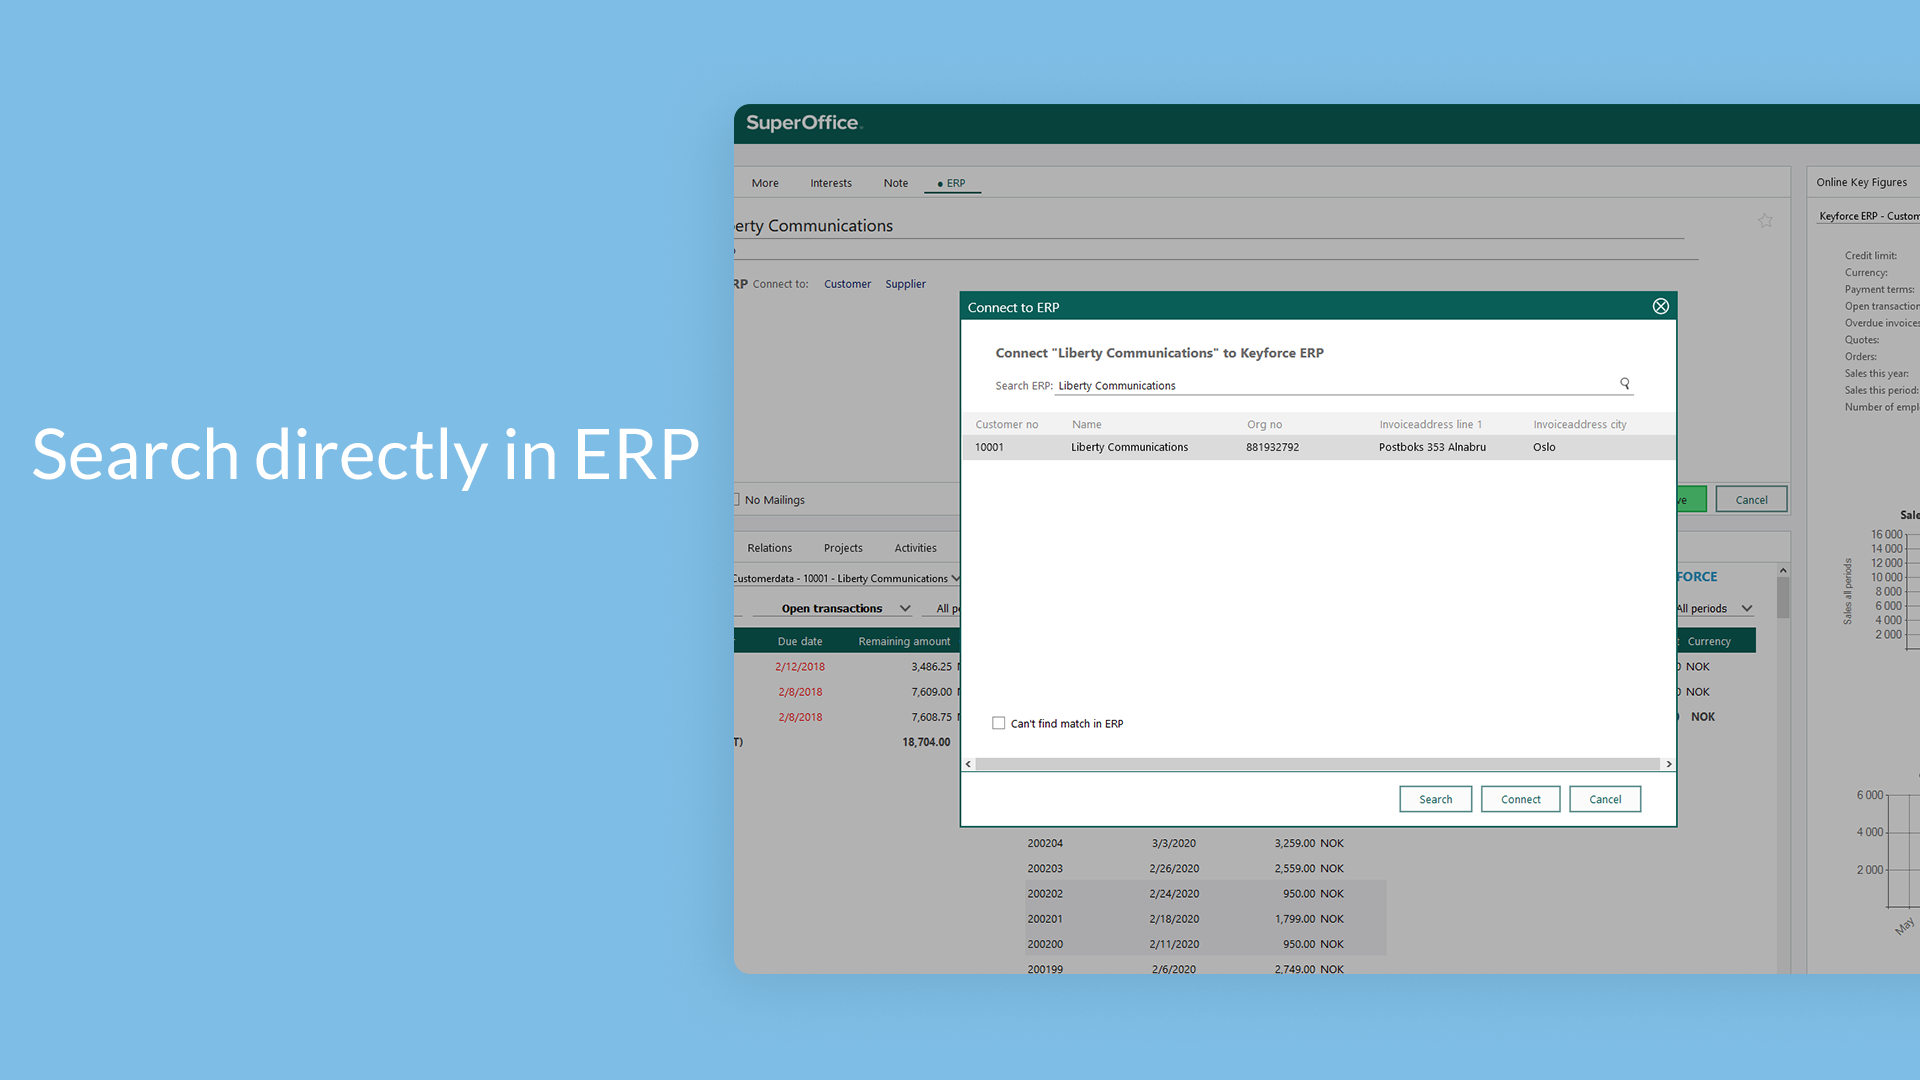 Search directly in ERP